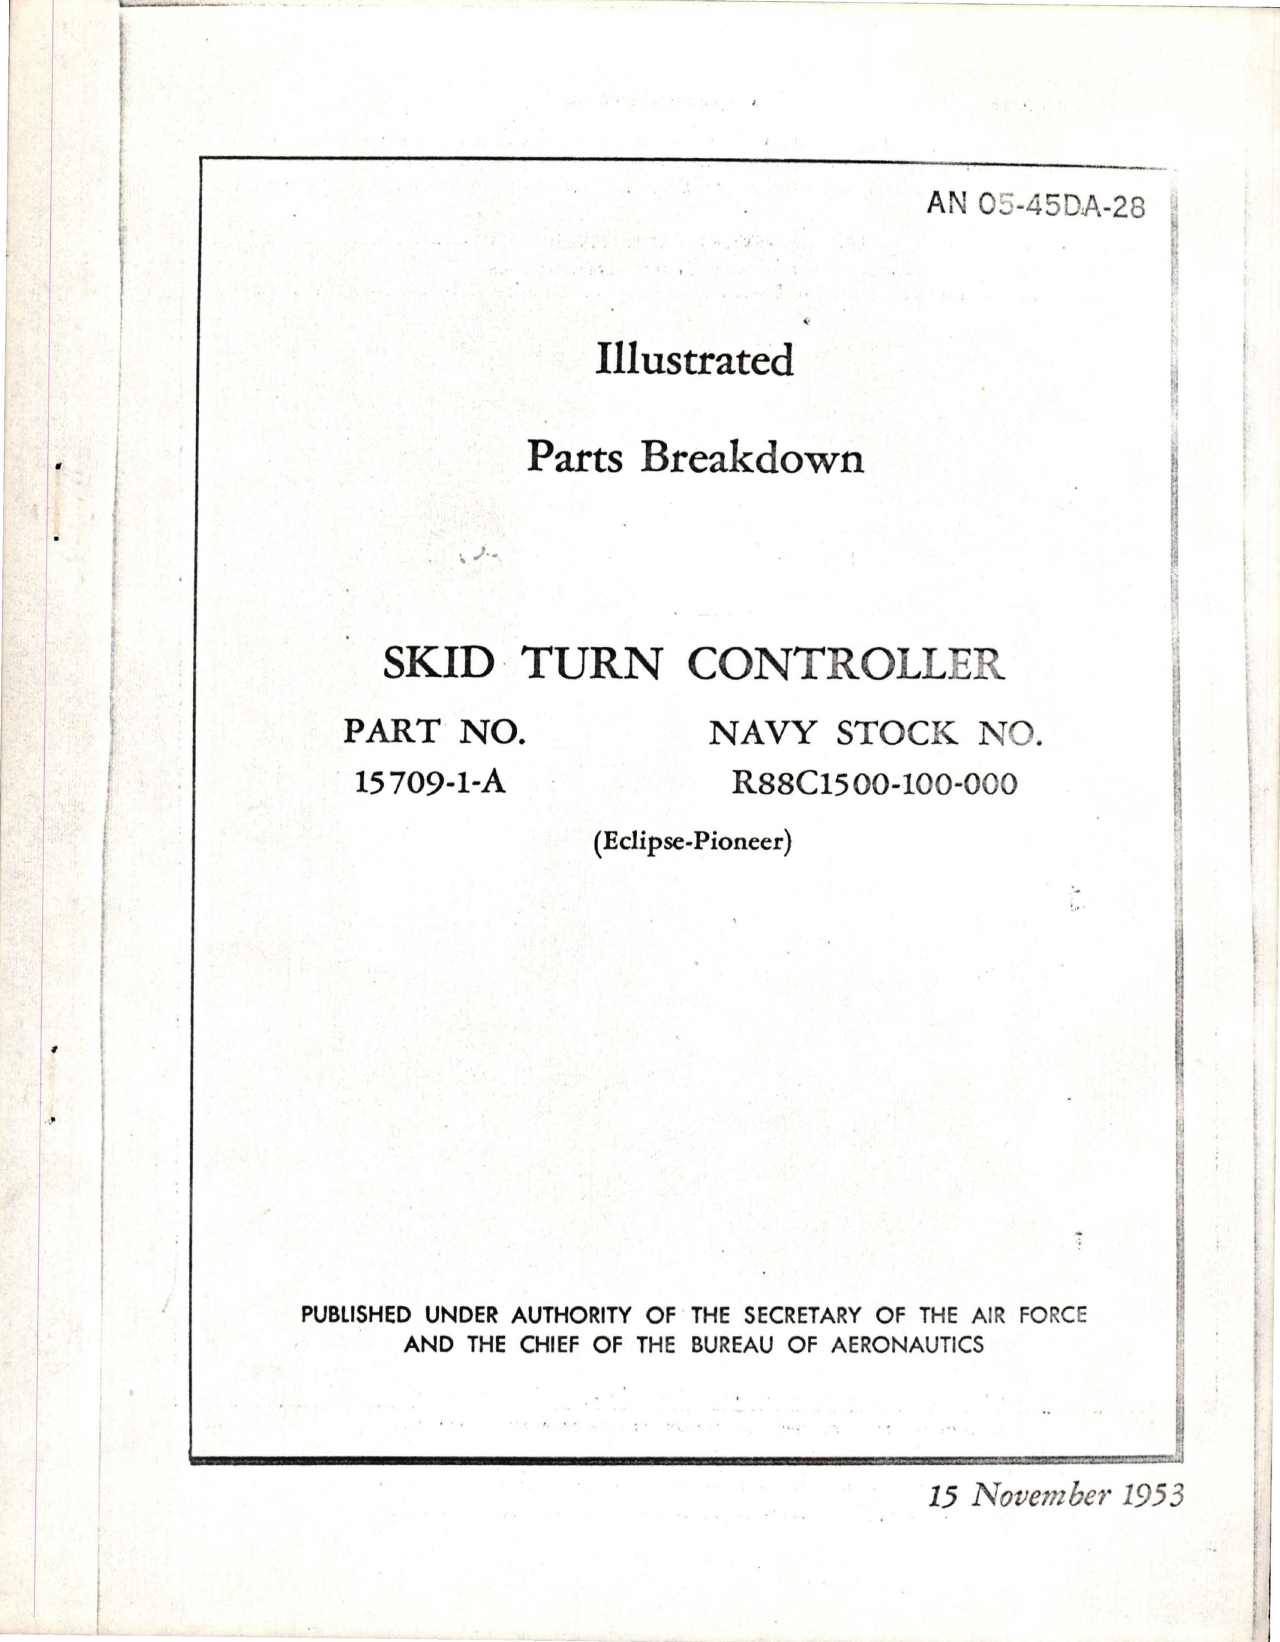 Sample page 1 from AirCorps Library document: Illustrated Parts Breakdown for Skid Turn Controller - Part 15709-1-A